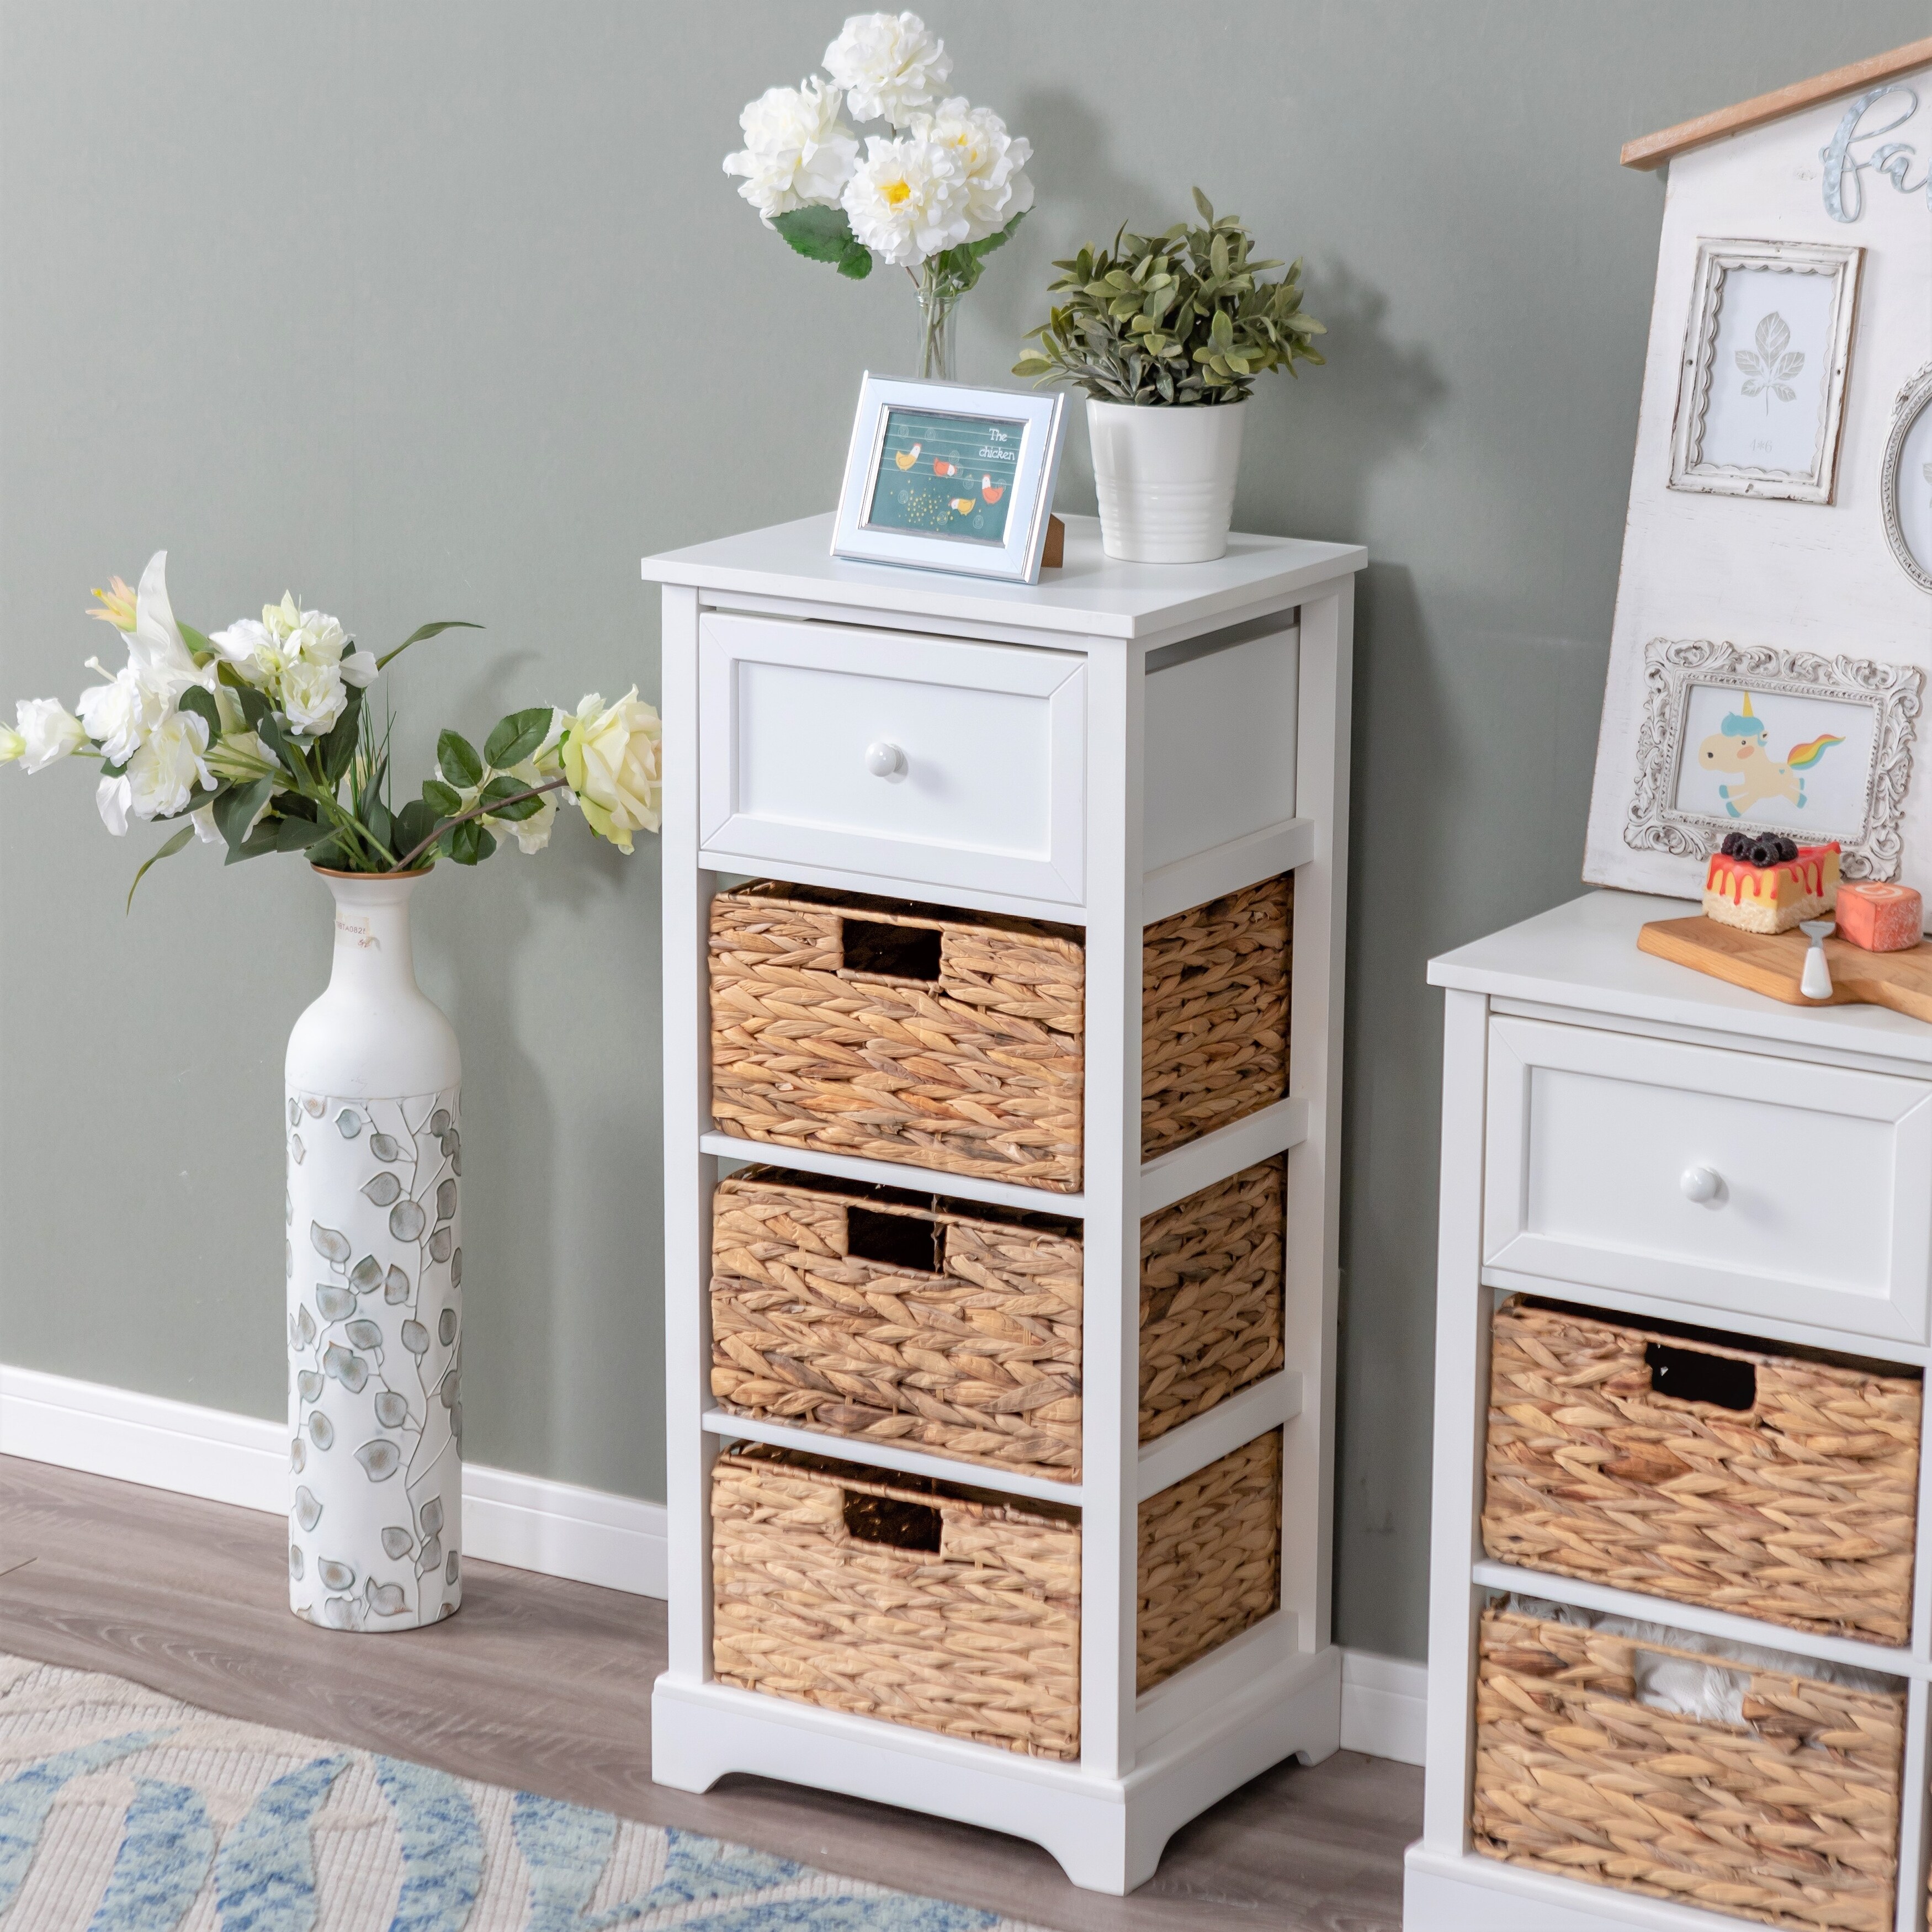 https://ak1.ostkcdn.com/images/products/is/images/direct/b5bdcd15aa0876f56e09ac8204bcc8662f2fec60/Sophia-%26-William-Side-Table-Decorative-Storage-Cabinet-with-Removable-Water-Hyacinth-Woven-Baskets.jpg